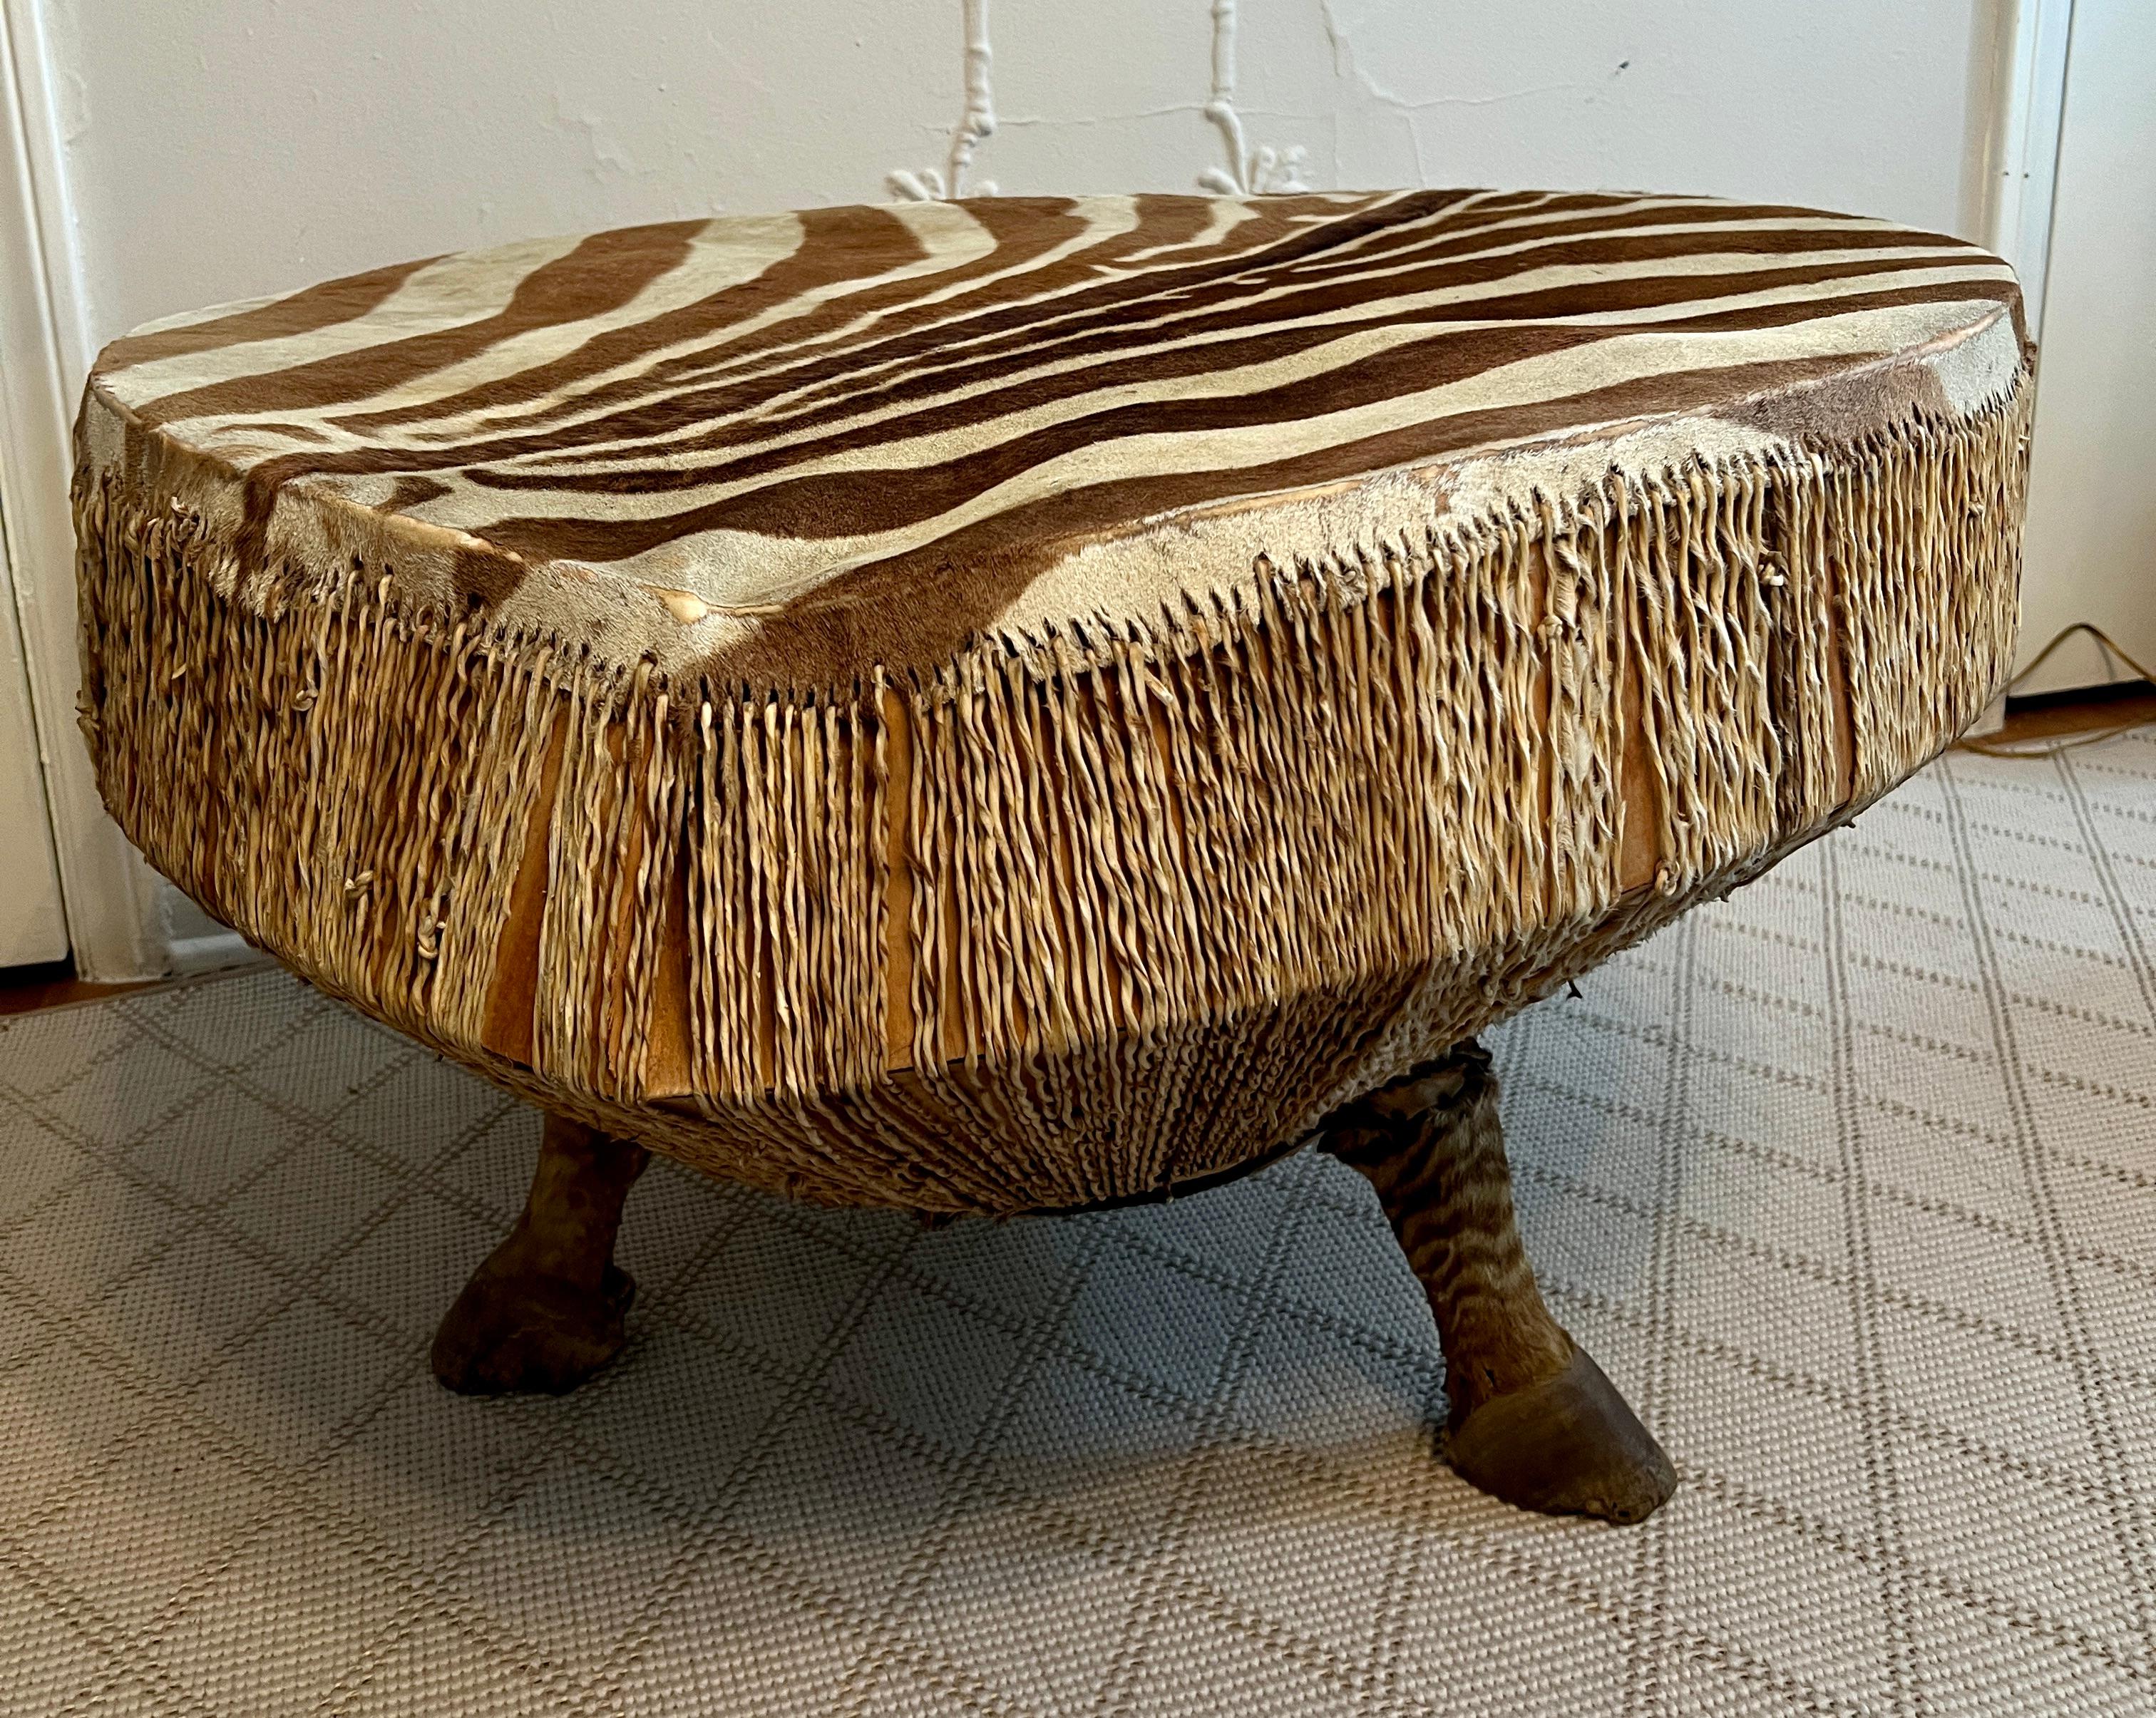 Hand-Crafted African Zebra Drum Table with Three Zebra Legs from Ghana For Sale